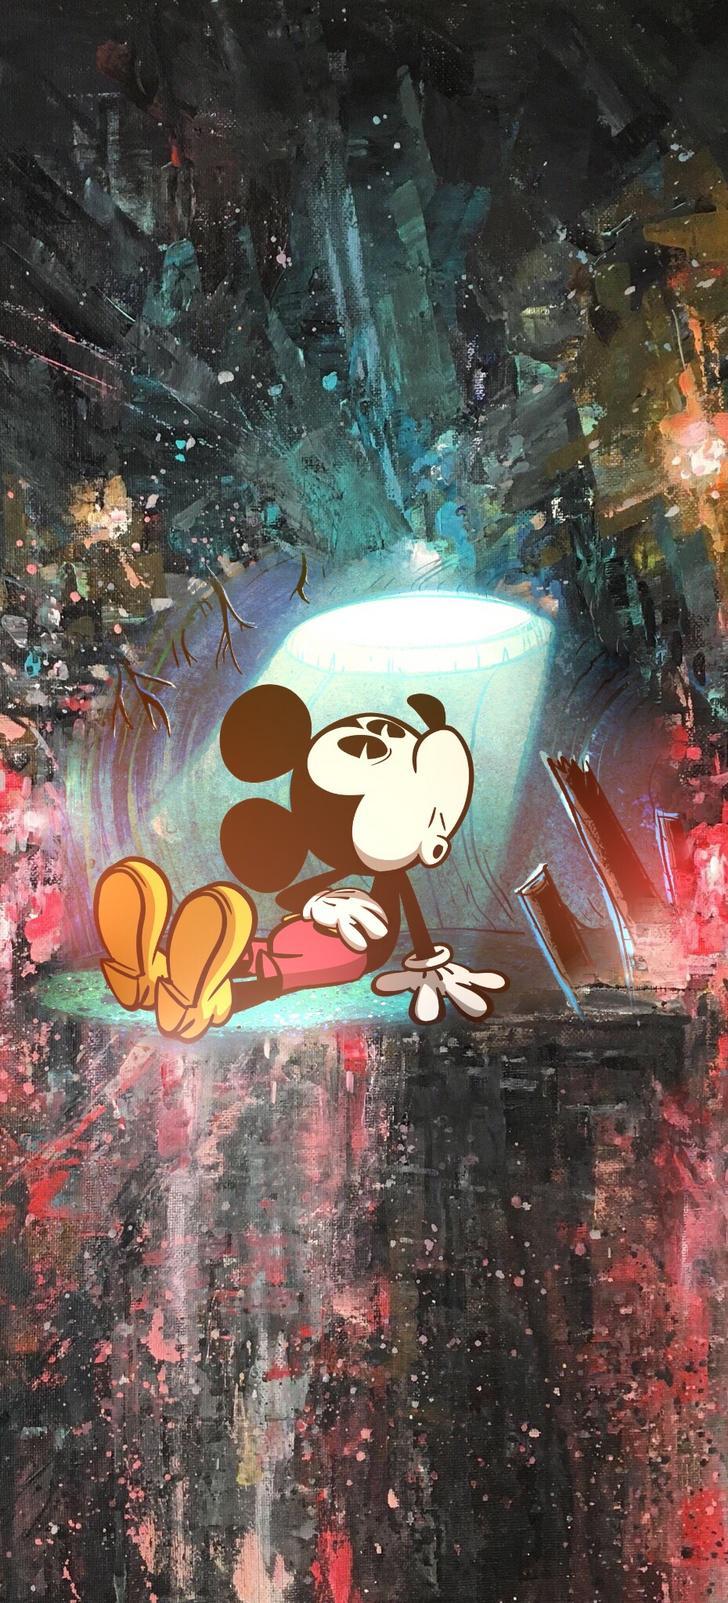 Mickey Mouse iPhonex wallpaper made by me on enlight app